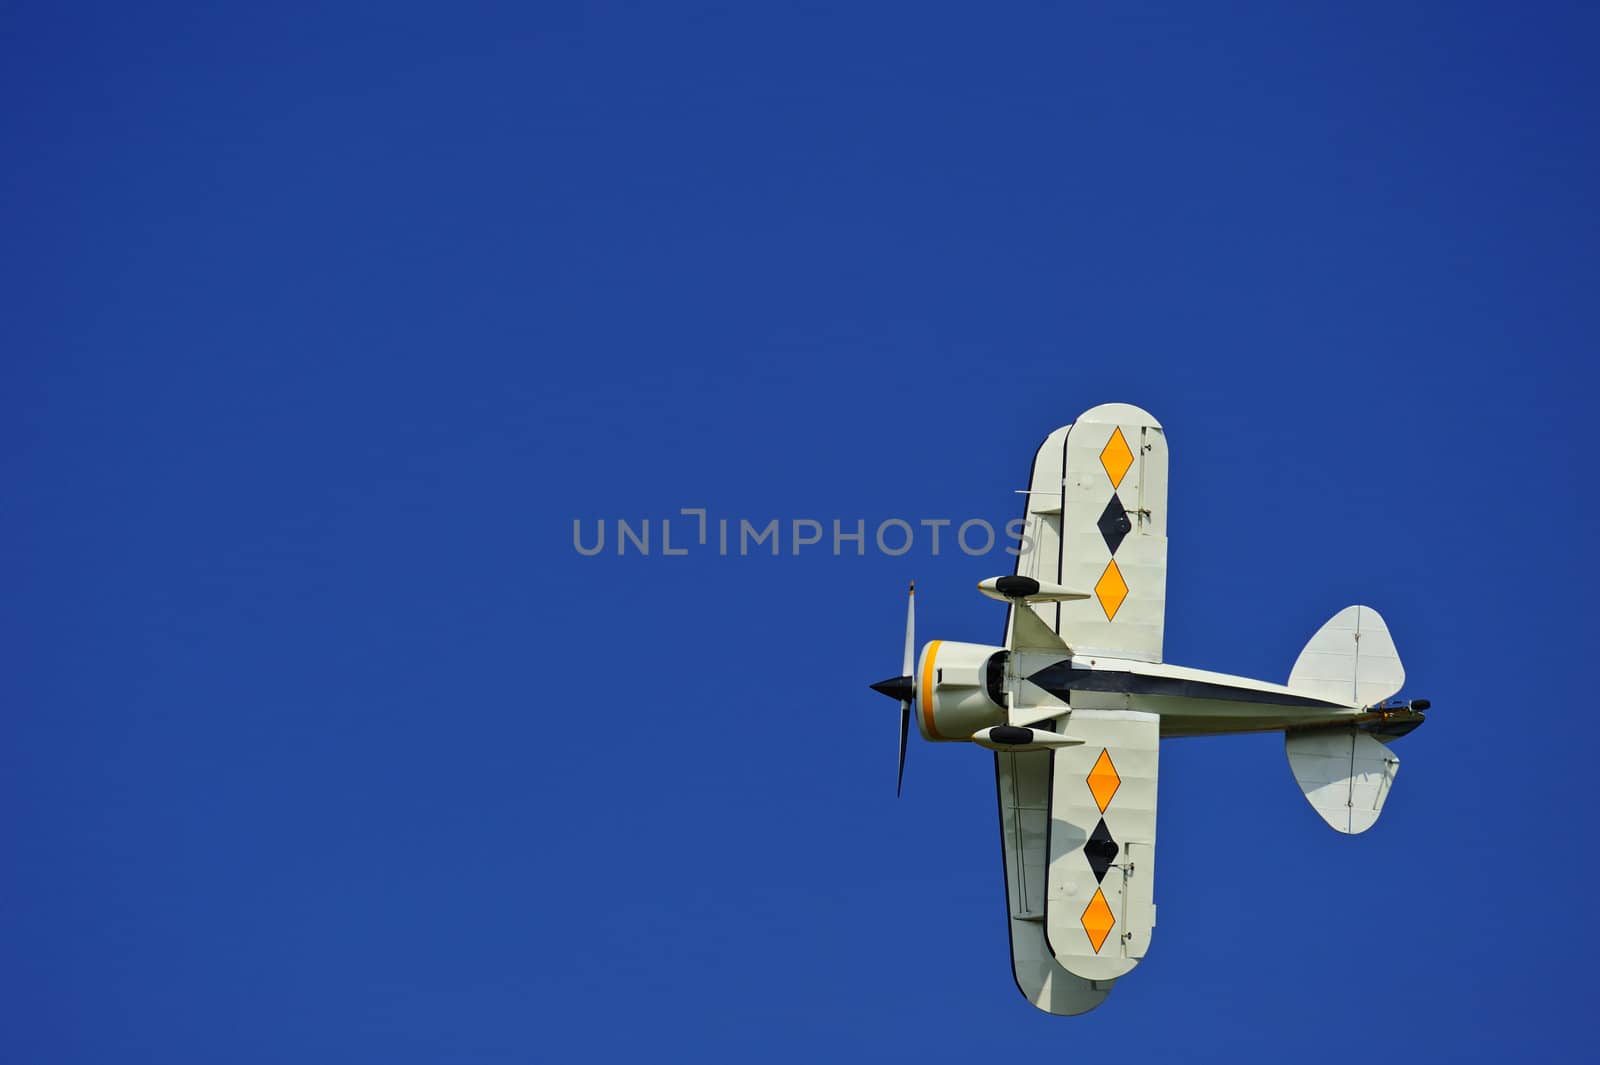 An aerobatic biplane flying directly overhead. Space for text in the sky.